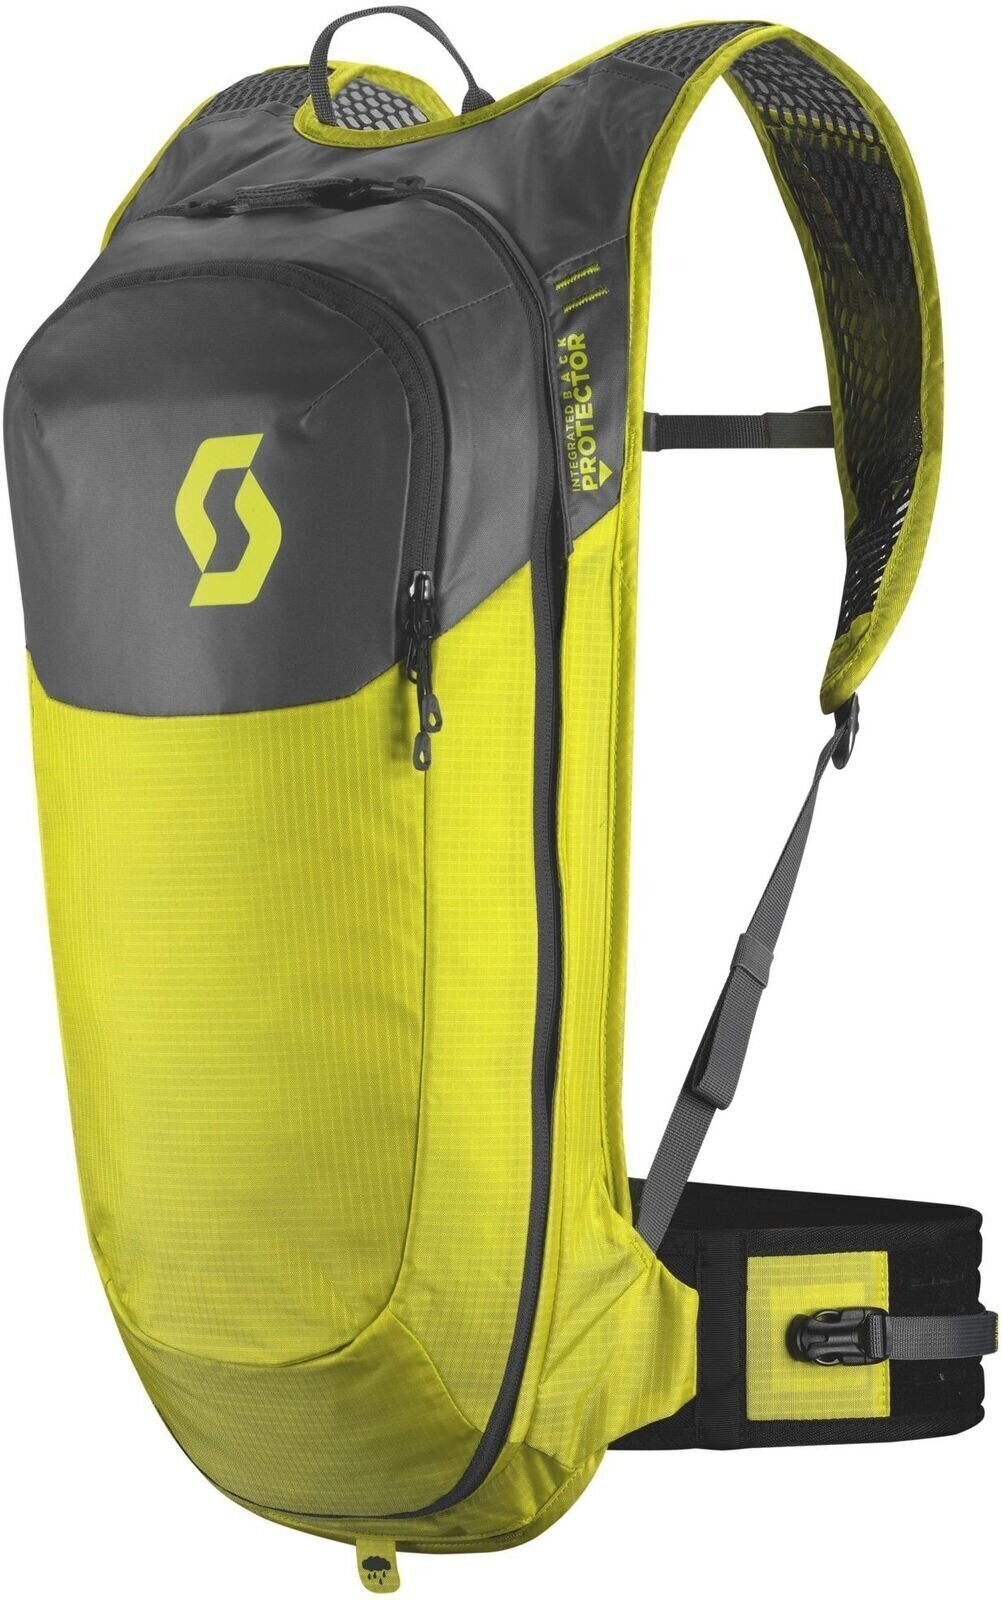 Cycling backpack and accessories Scott Trail Protect FR' 10 Sulphur Yellow/Dark Grey Backpack